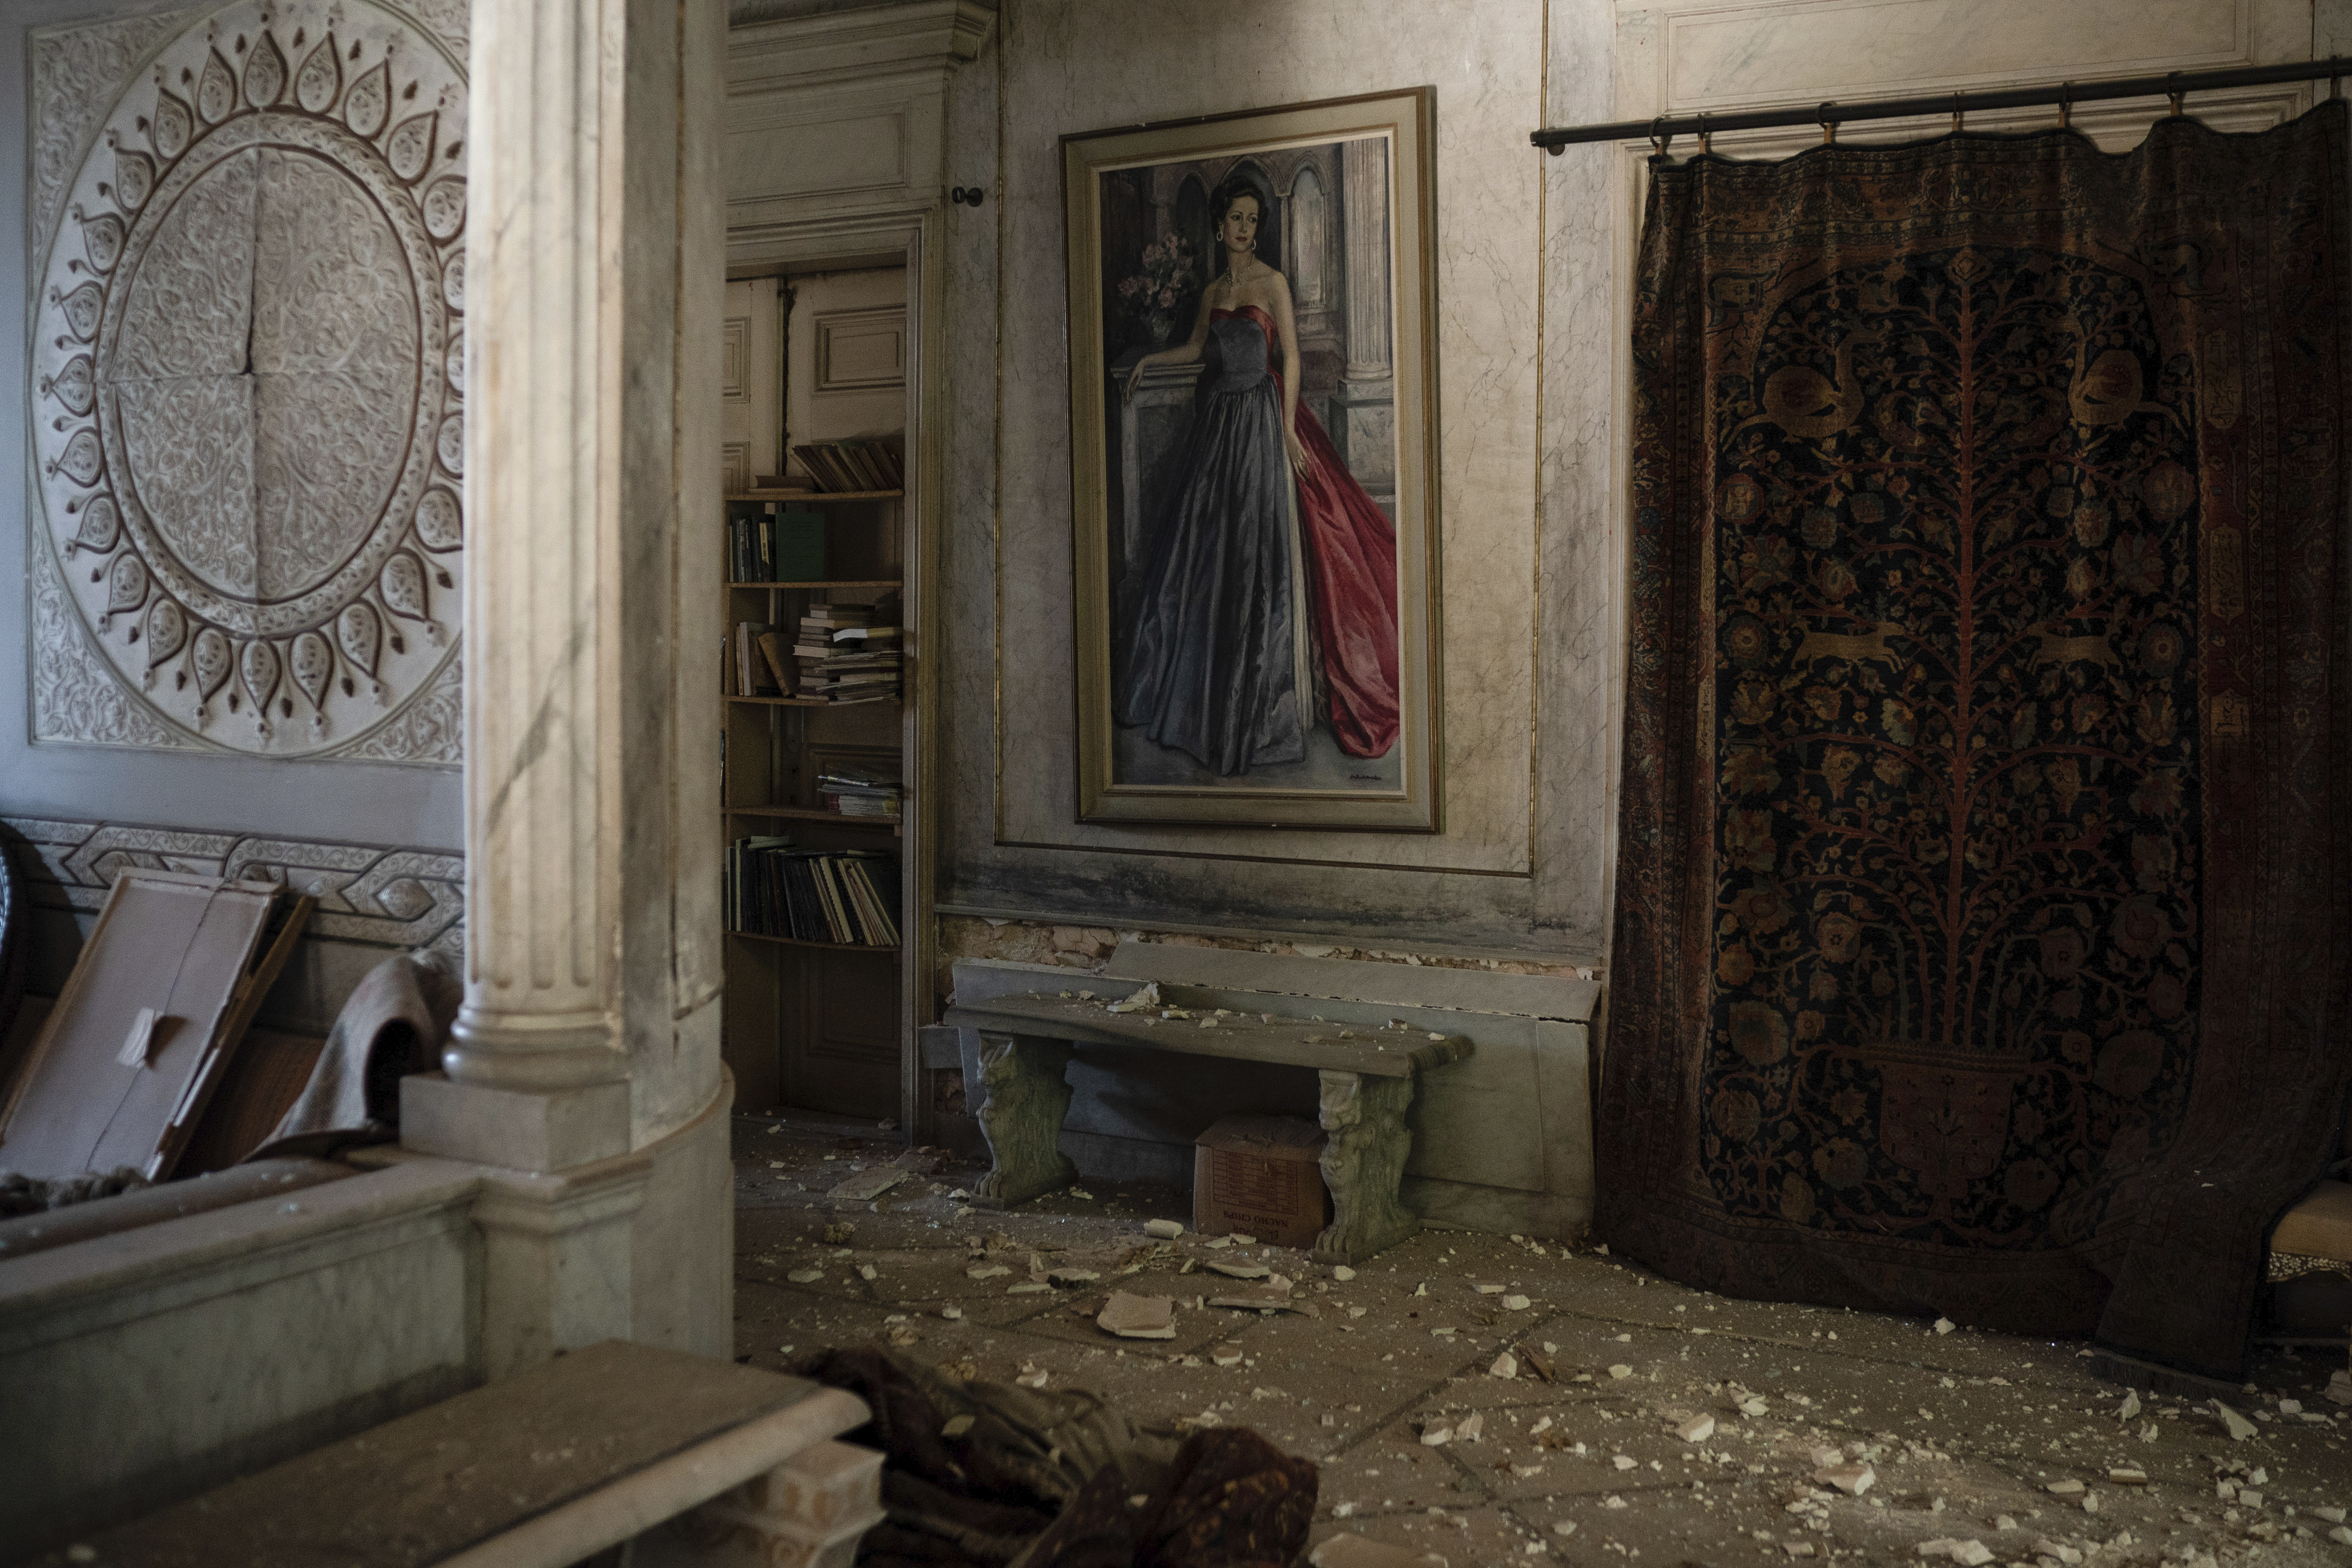 Debris from the ceiling and walls cover the floor of a room in the Sursock Palace, heavily damaged after the explosion in the seaport of Beirut, Lebanon